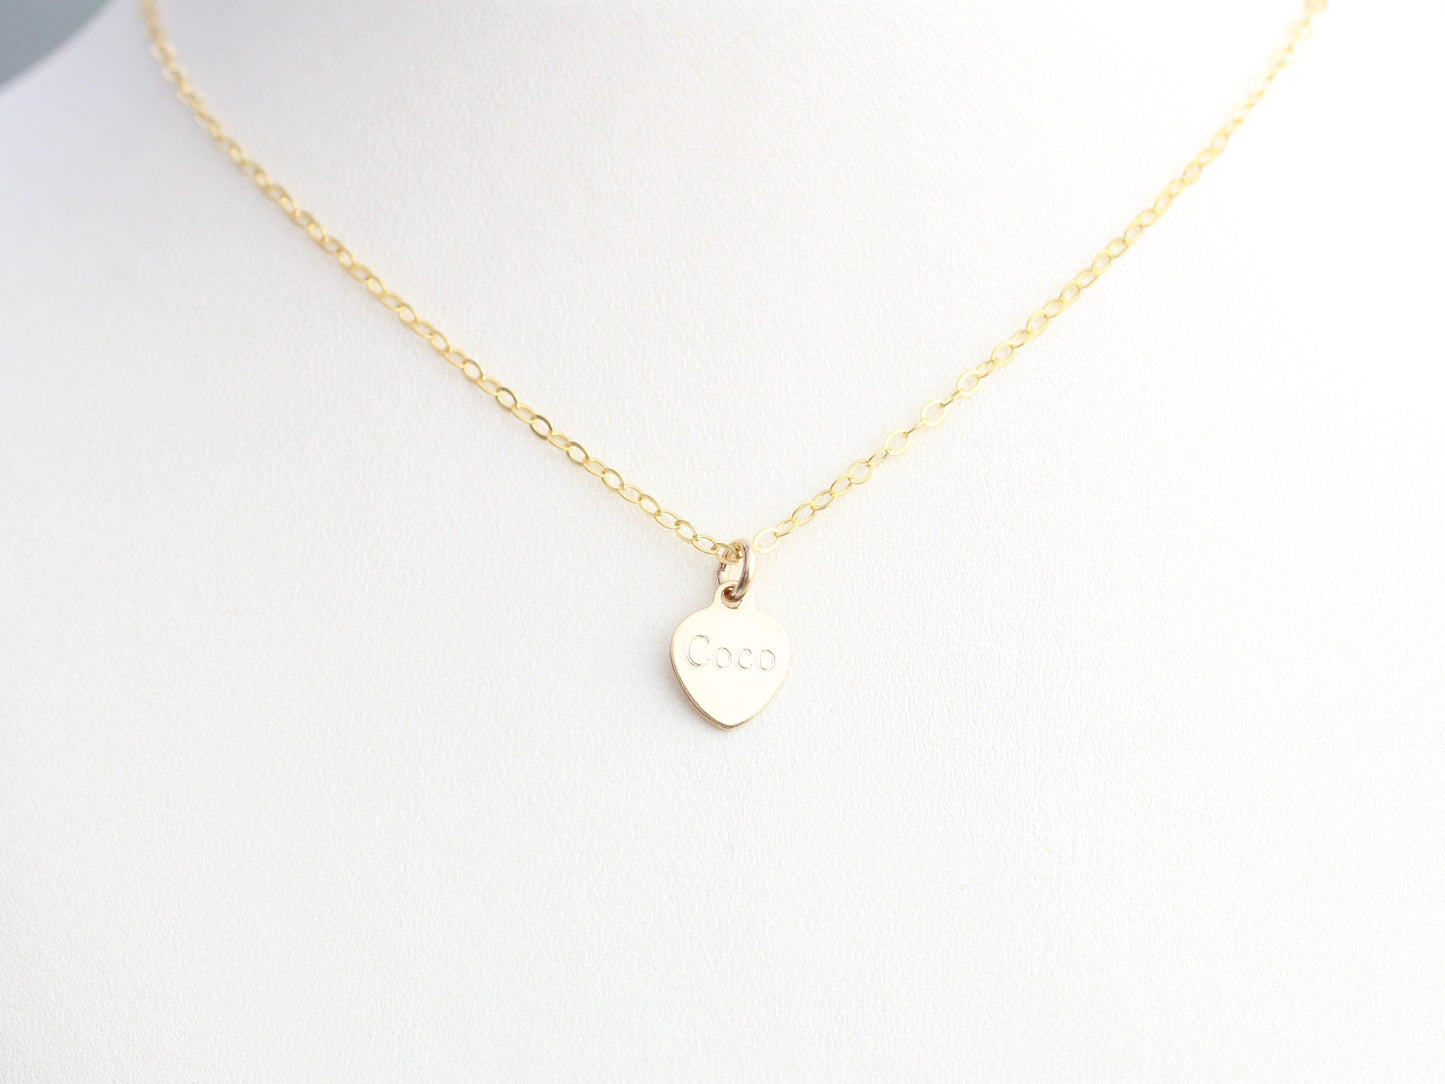 Personalised gold heart necklace. Valentines necklace.